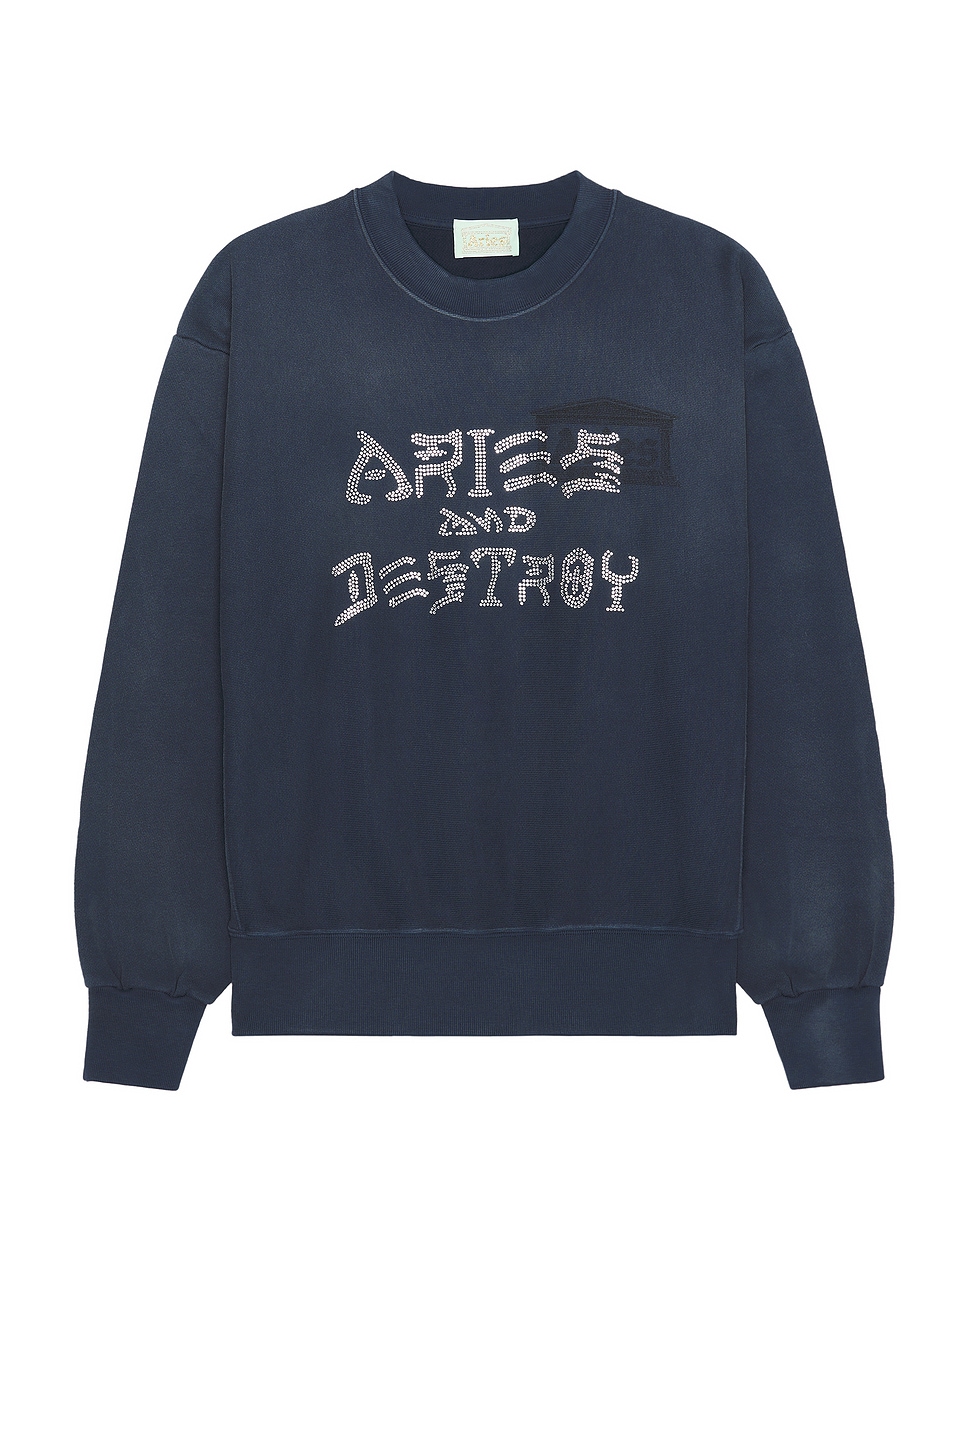 Image 1 of Aries Aged Aries And Destroy Diamante Sweatshirt in Navy